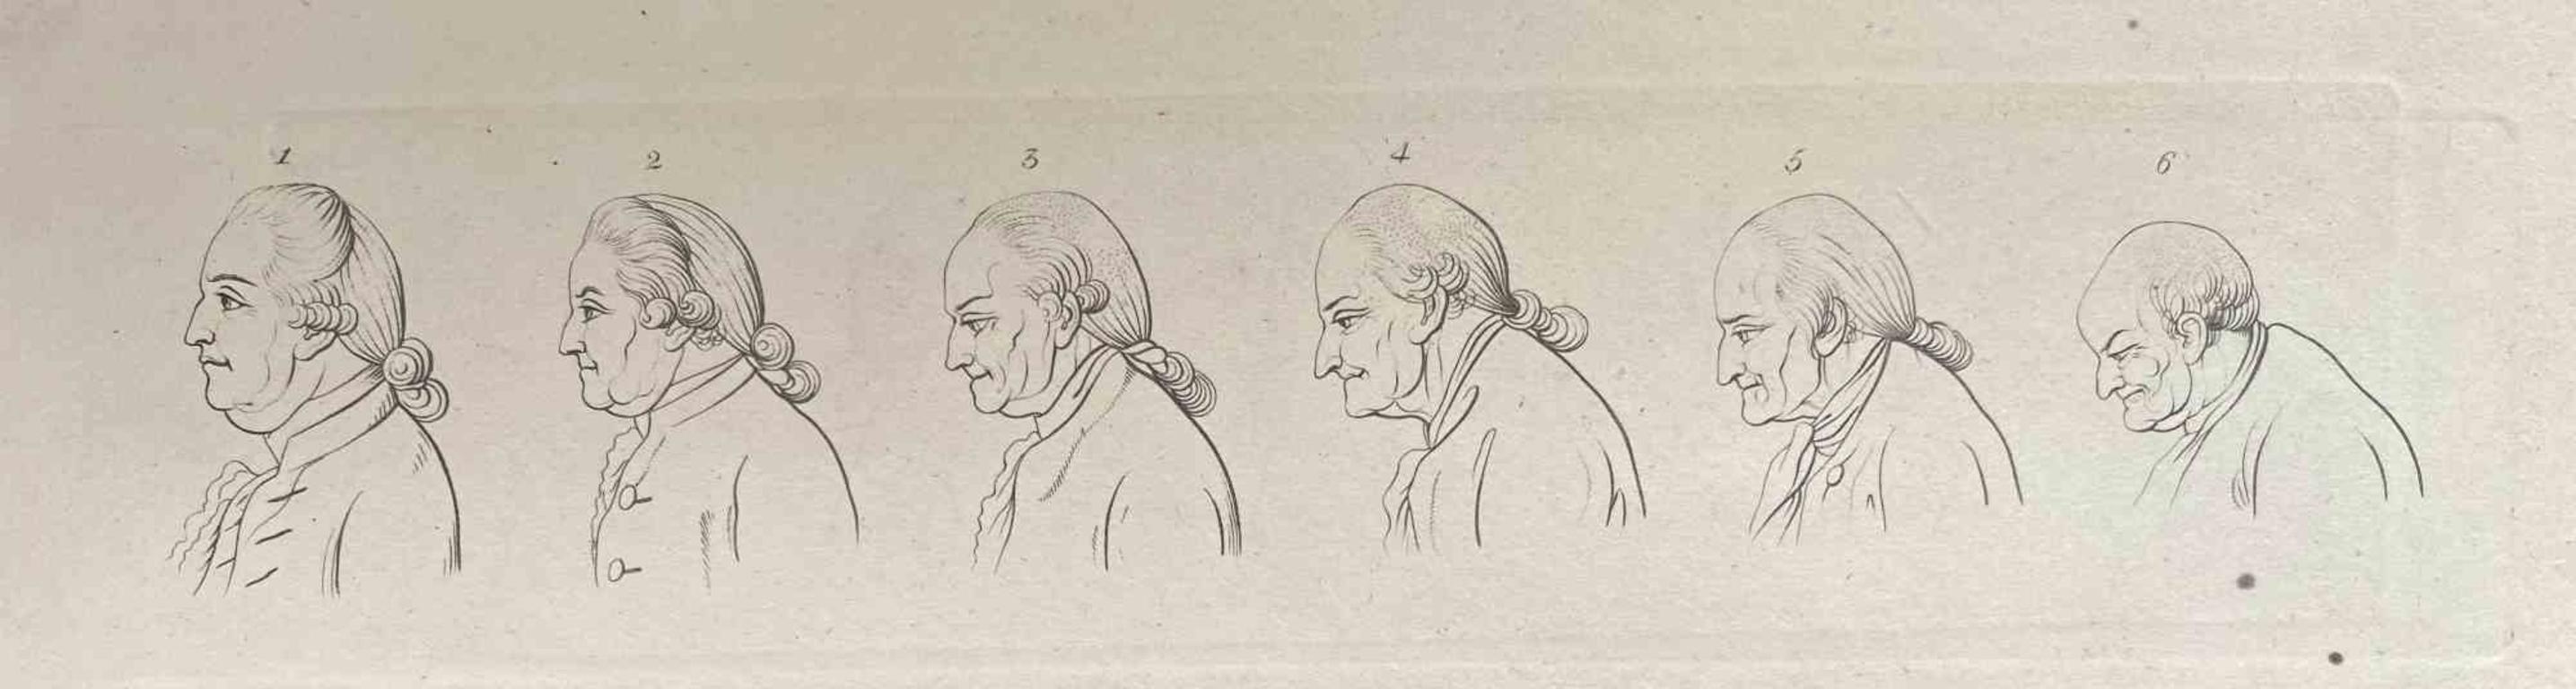 Head of a Man Throughout the Years - Original Etching by Thomas Holloway - 1810 For Sale 1